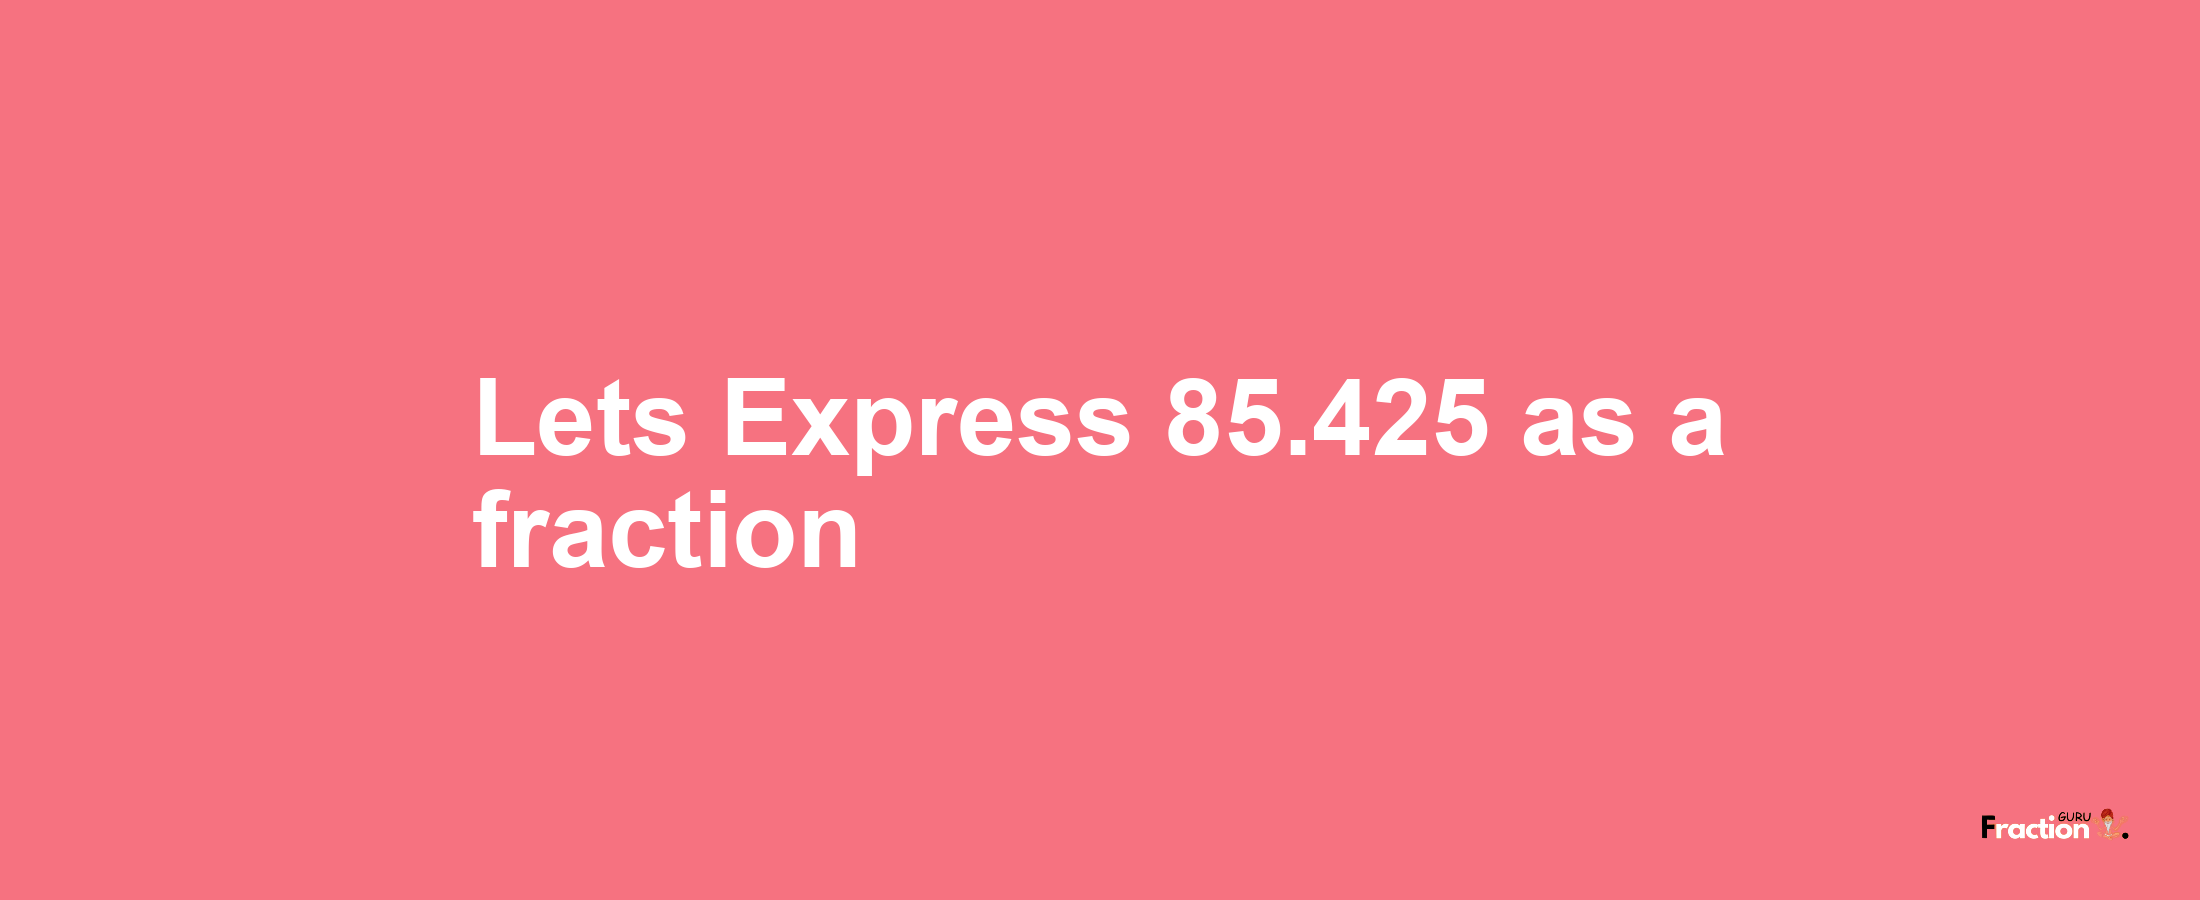 Lets Express 85.425 as afraction